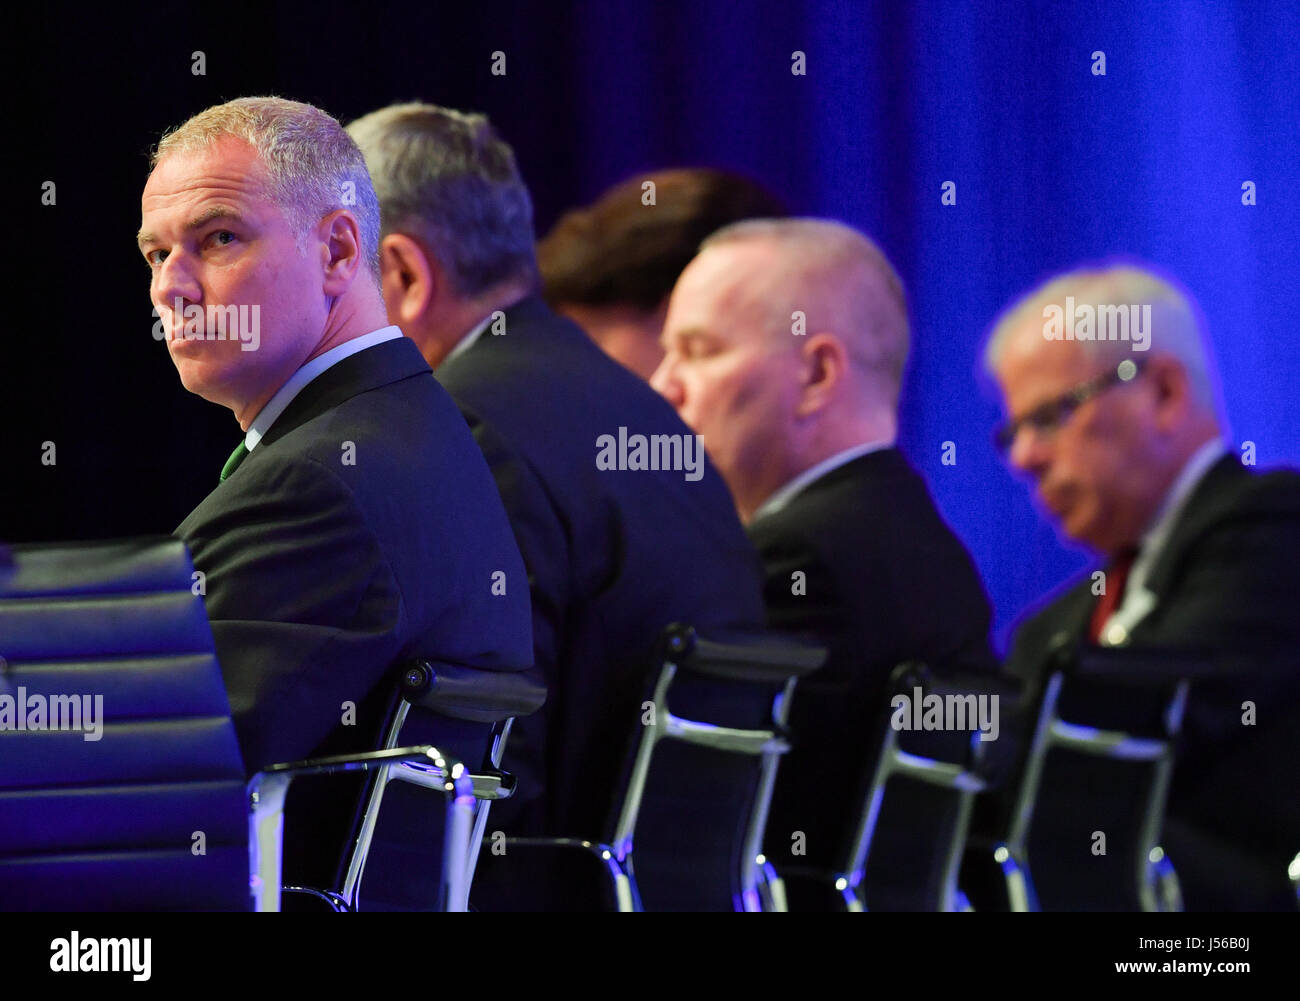 dpatop - Carsten Kengeter (L), the CEO of Deutsche Boerse AG, with fellow board of directors members Jeffrey Tessler (R-L), Hauke Stars, Andreas Preuss and Gregor Pottmeyer at the company's annual general meeting in Frankfurt am Main, Germany, 17 May 2017. Photo: Arne Dedert/dpa Stock Photo